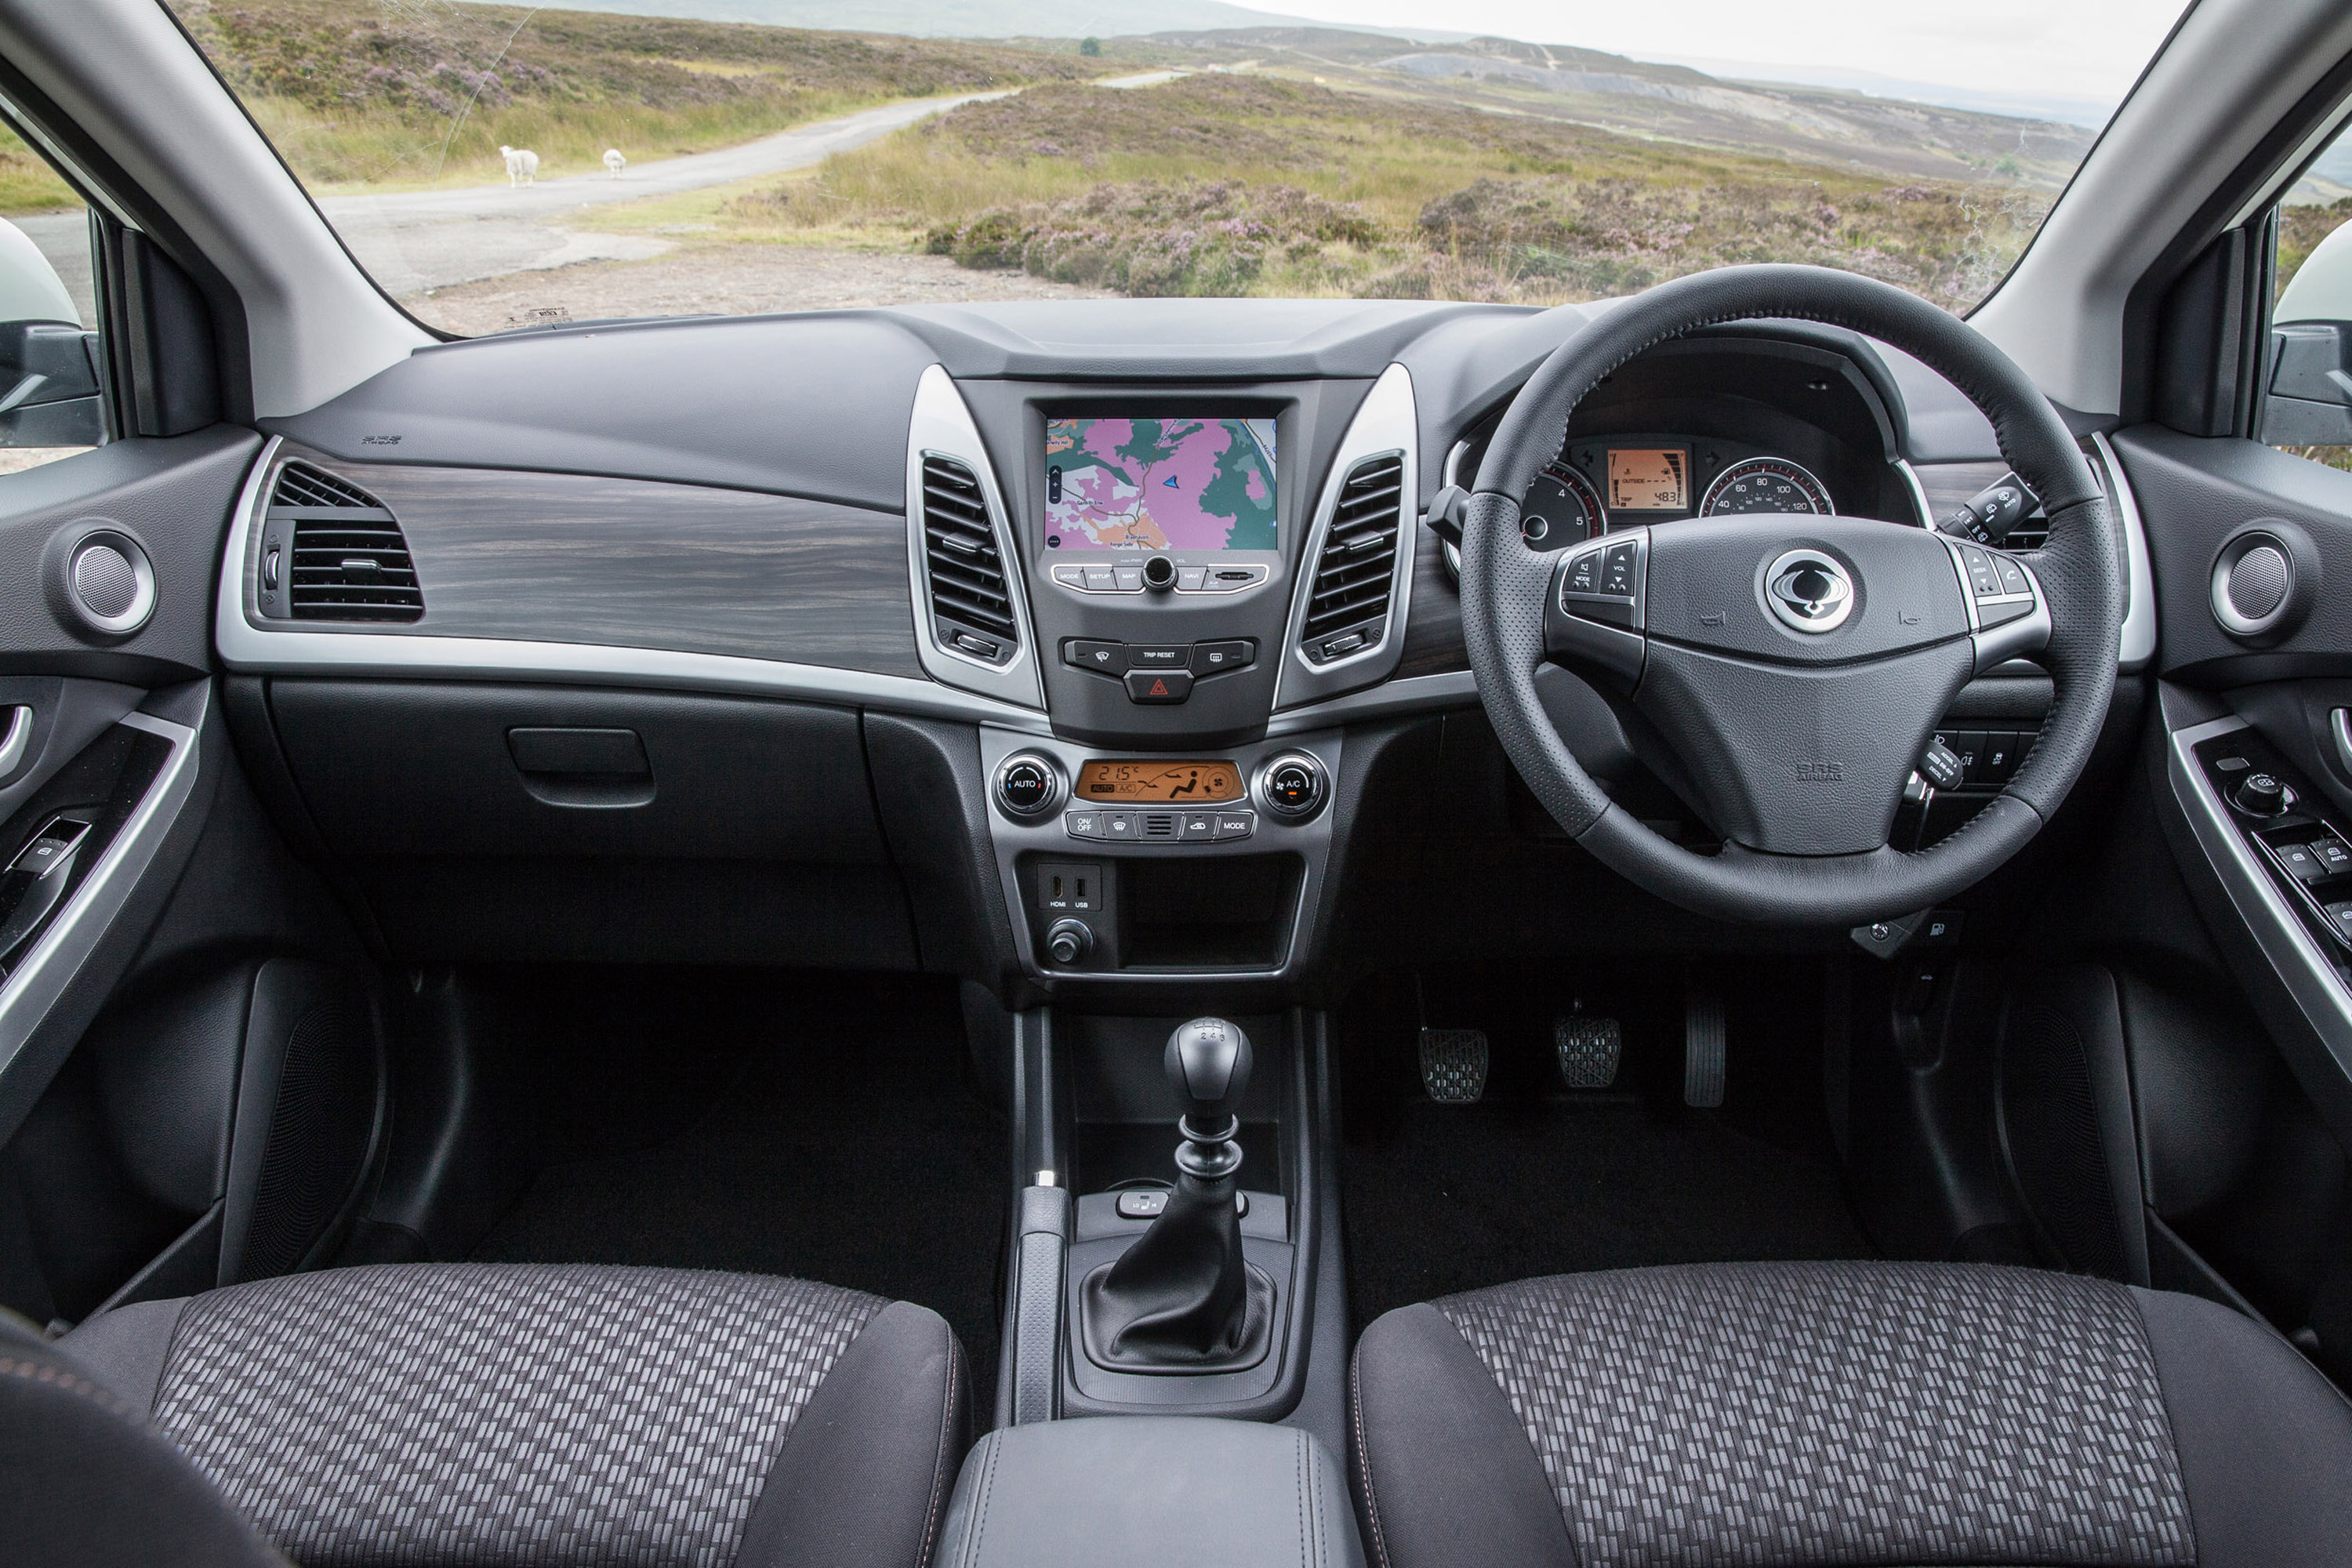 SsangYong Rodius interior specifications